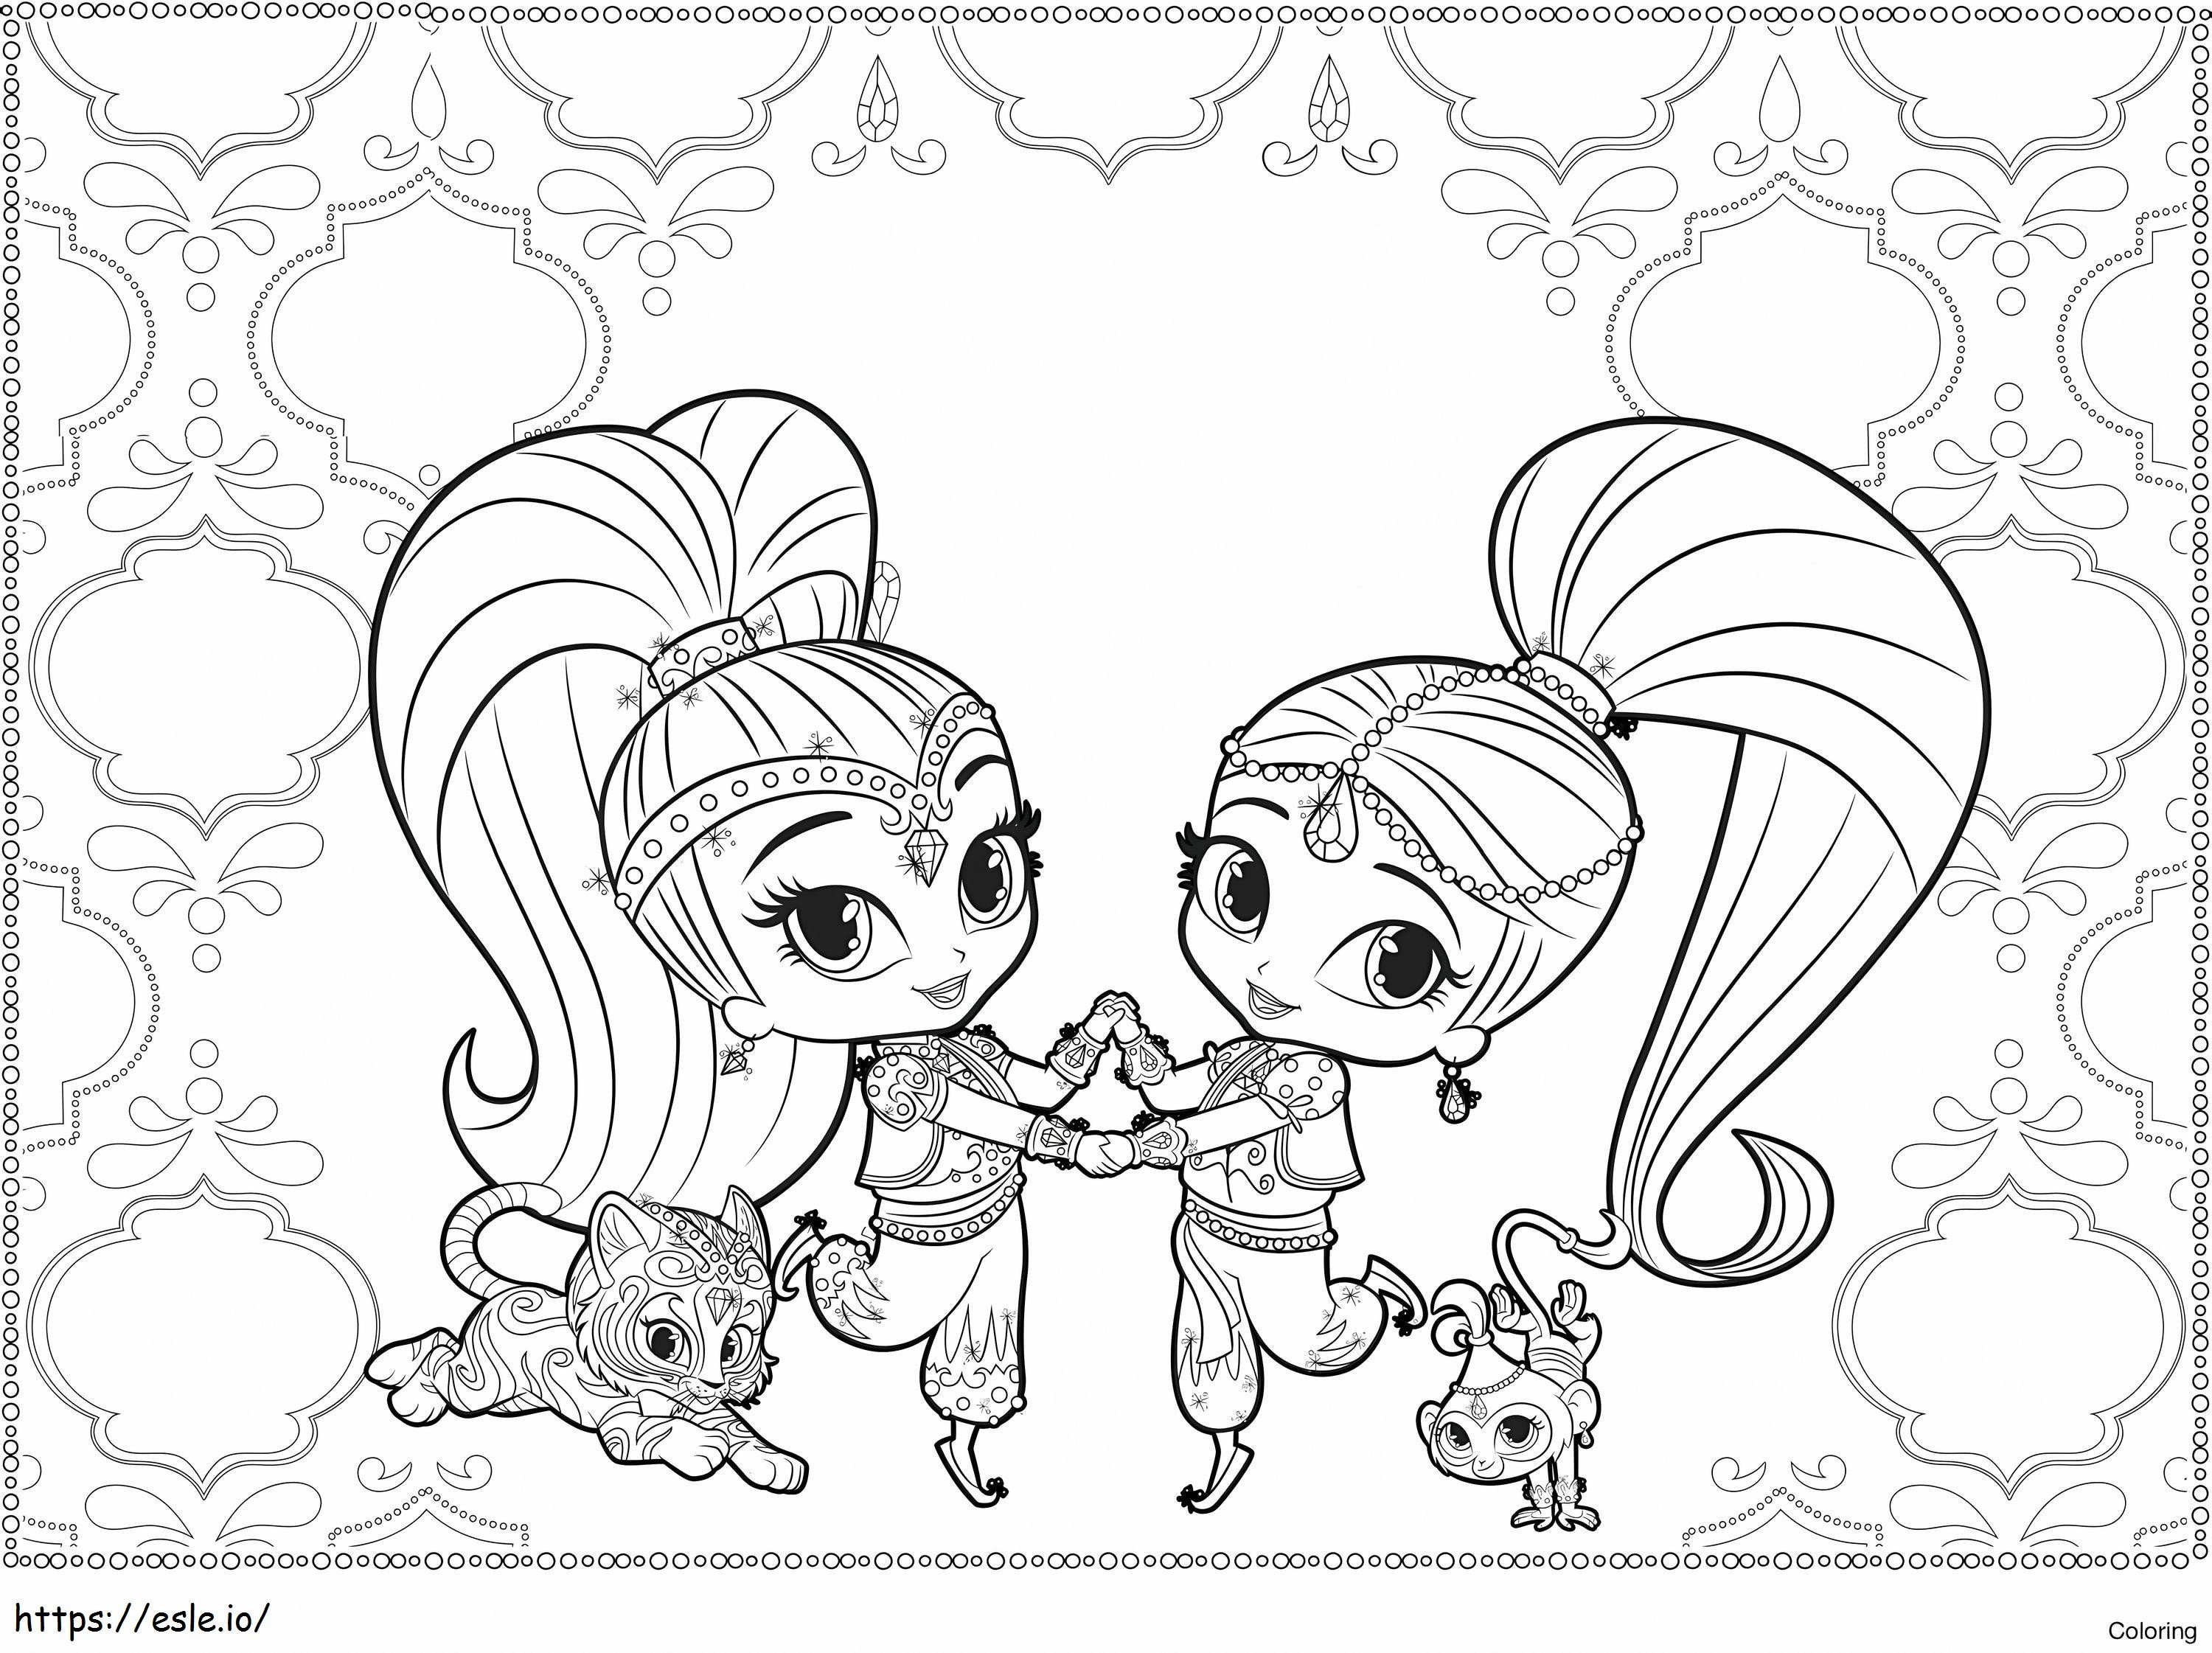 1571704955 Free Shimmer And Shine Nuevo Fresh Shimmer And Shine De Free Shimmer And Shine para colorear